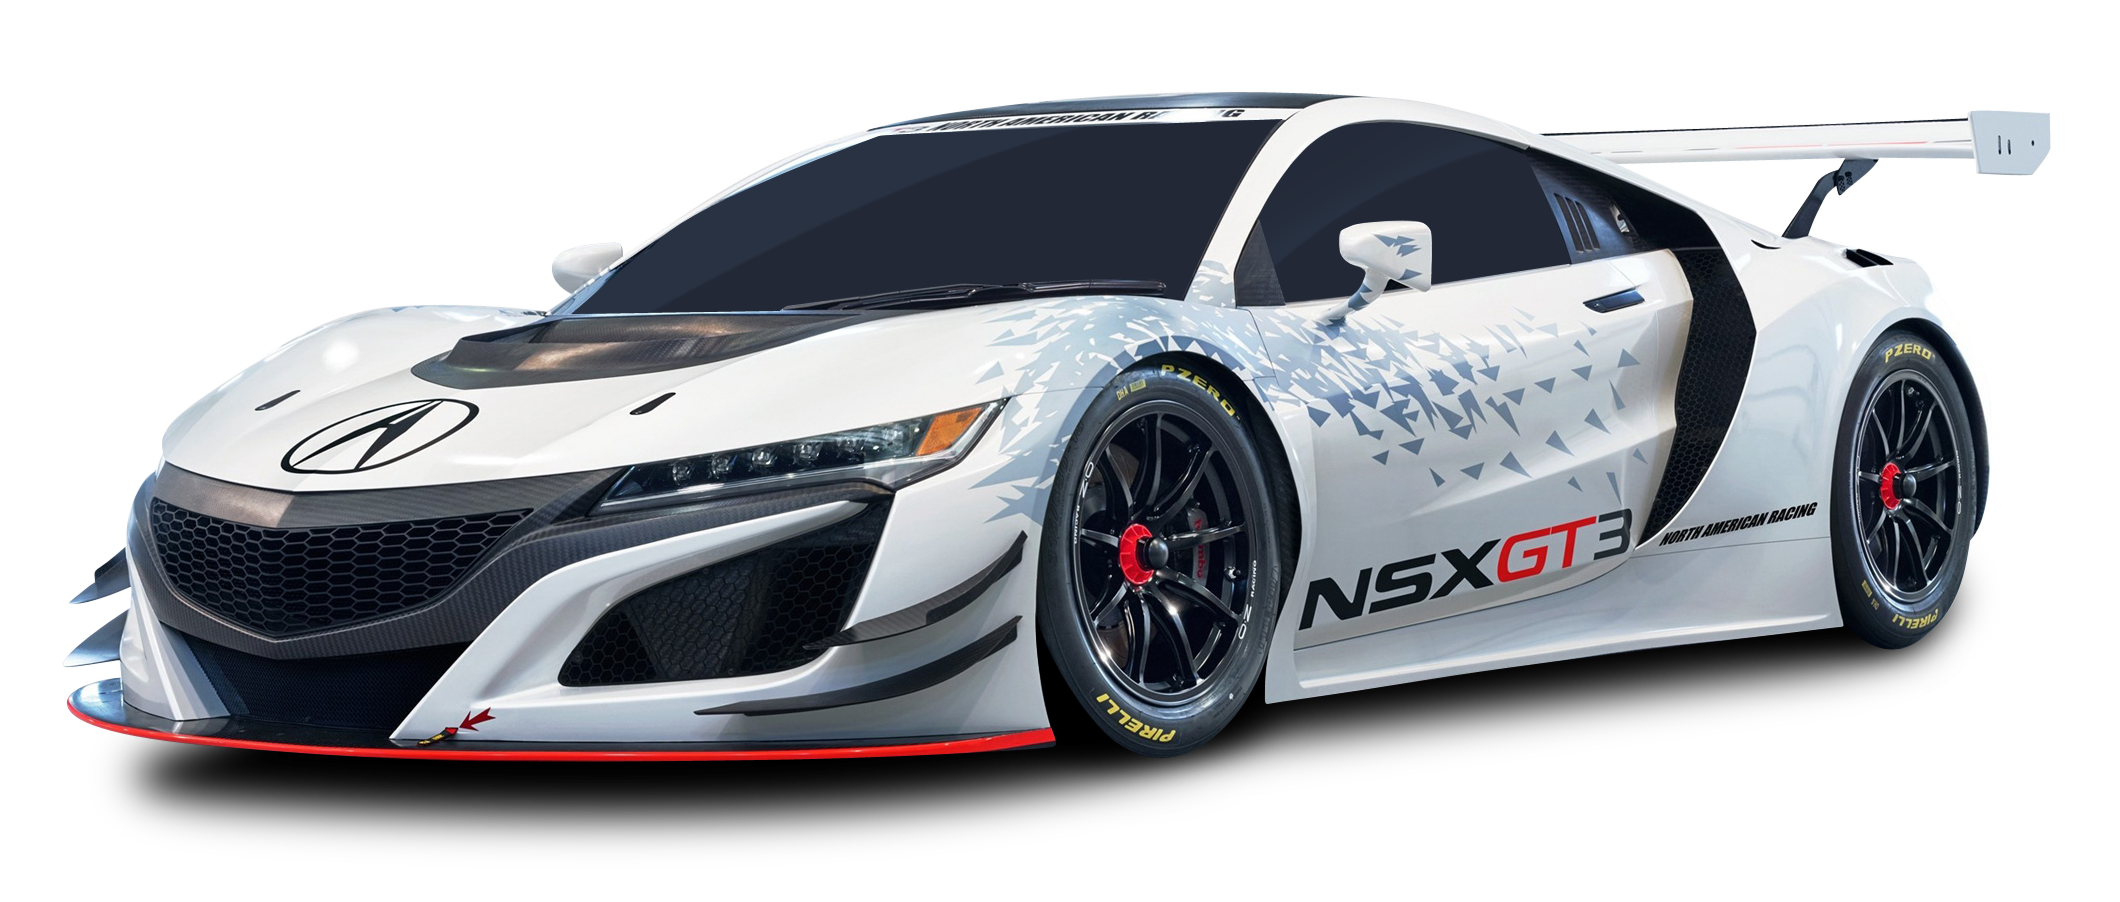 Acura NSX GT3 Racing White Car PNG Image.